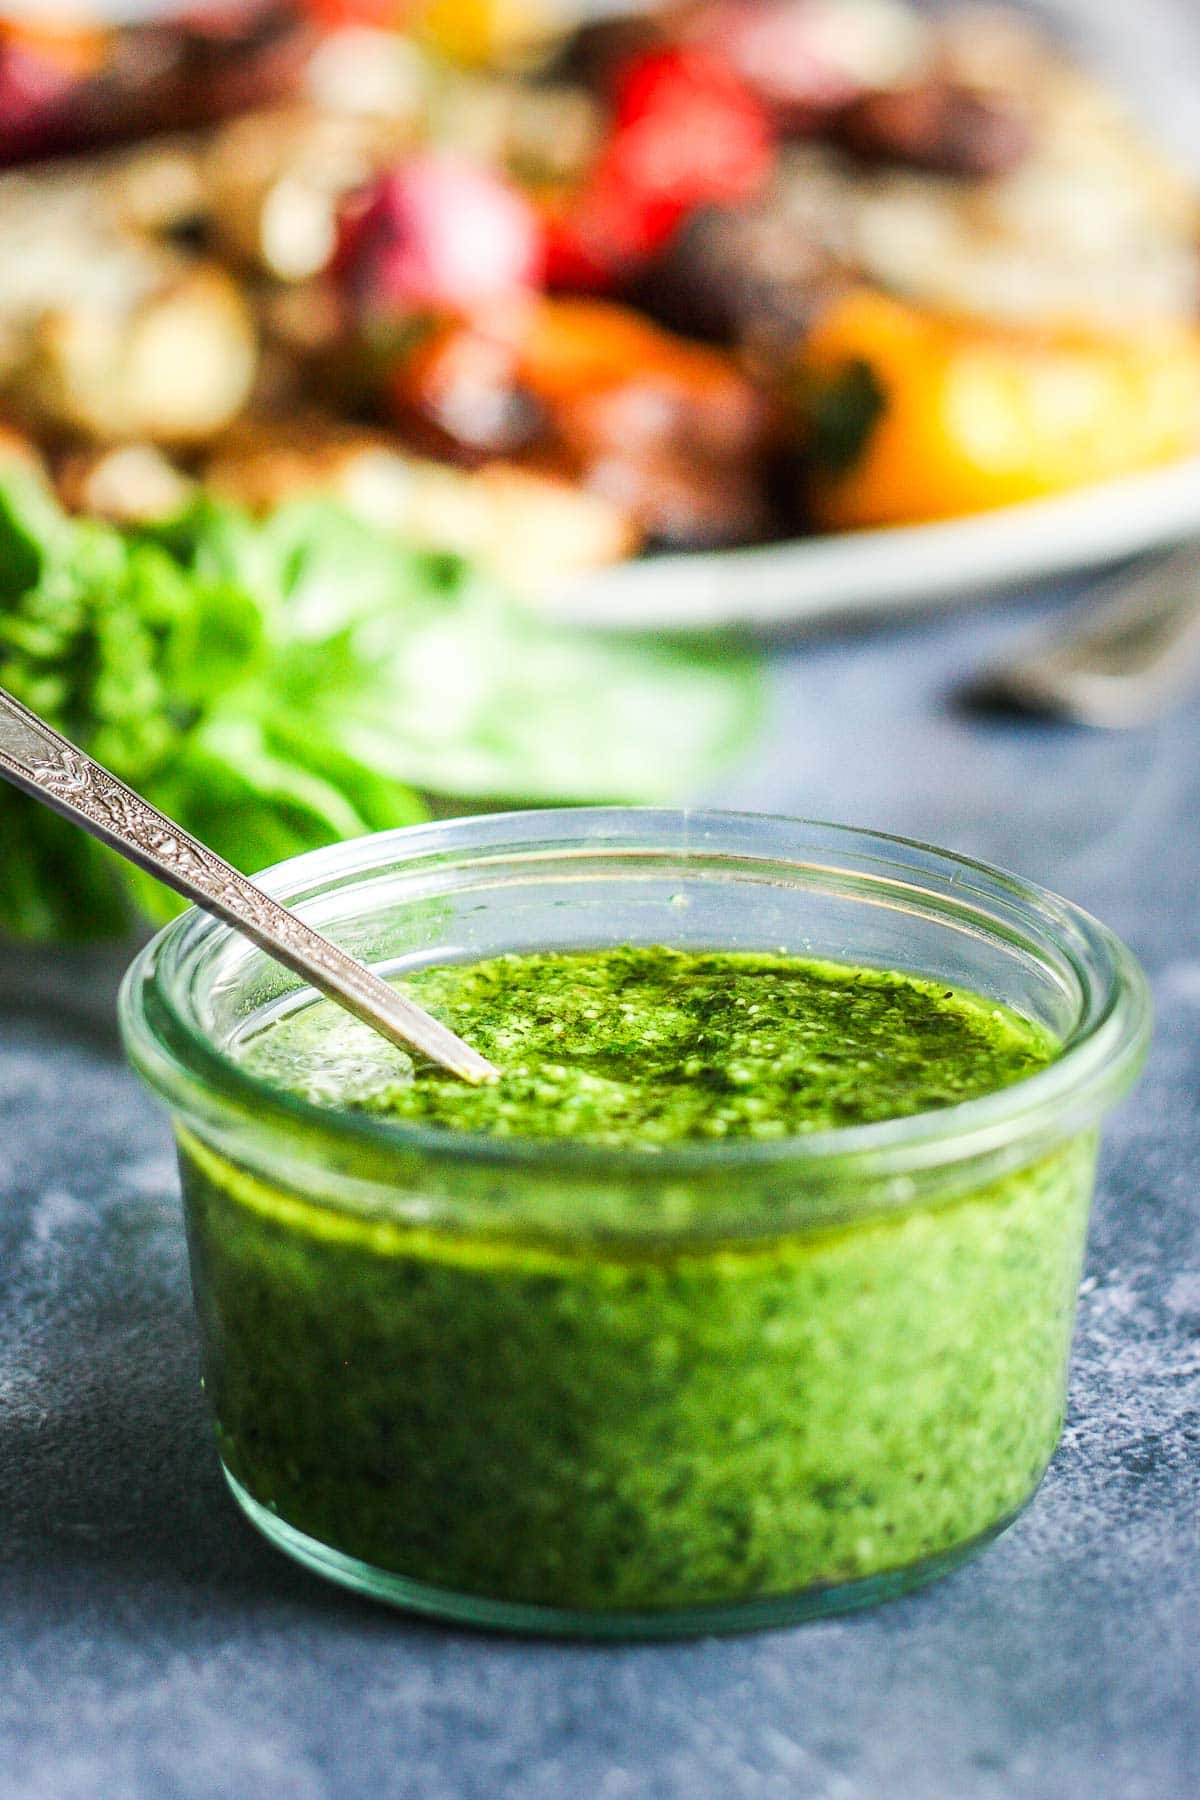 This fresh Basil Pesto recipe is brimming with bright and savory peppery basil goodness!  This version is nut-free, made with nutritious hemp seeds and a splash of lemon.